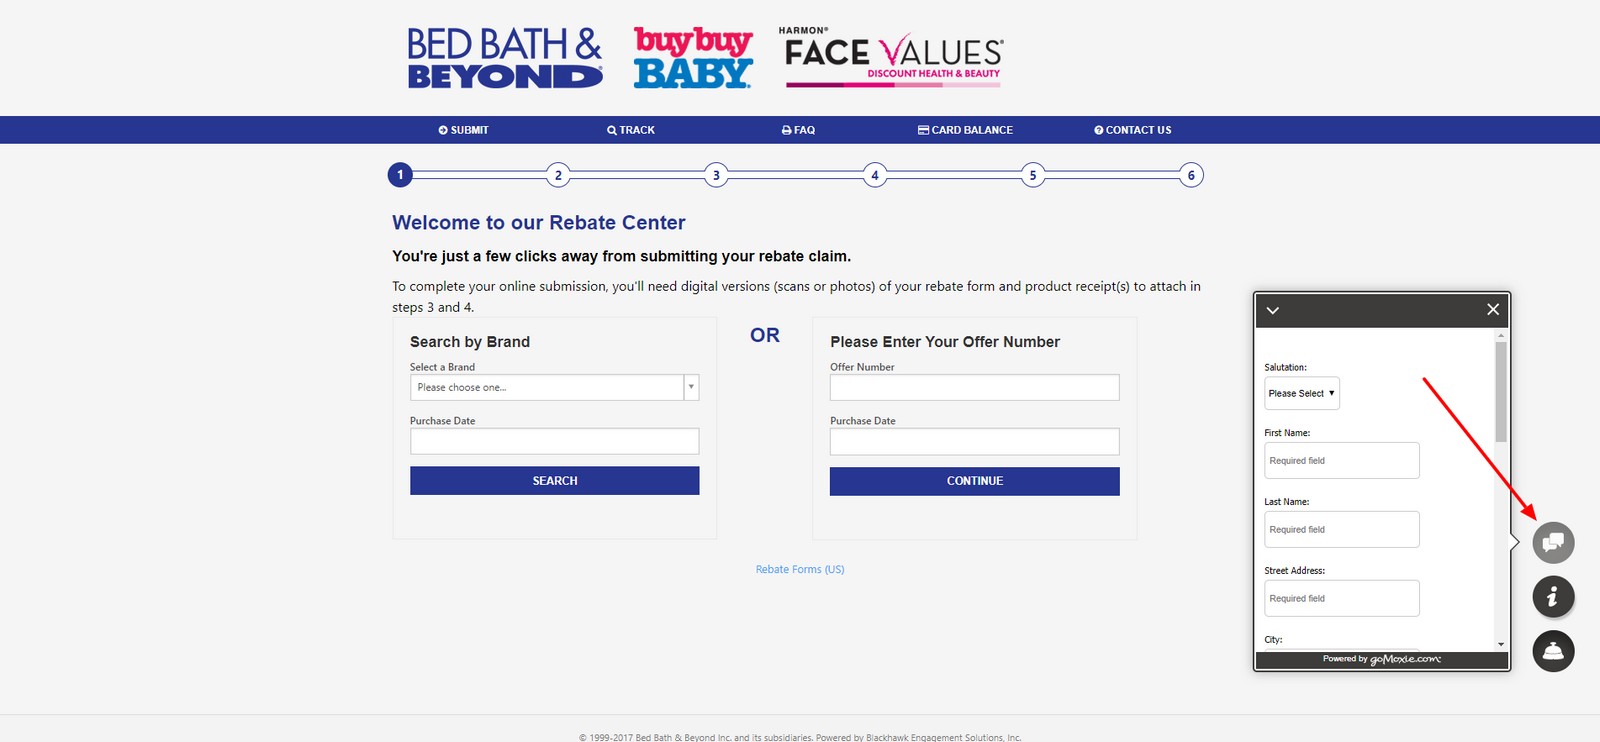 Issues With Bed Bath & Beyond Rebate Submission